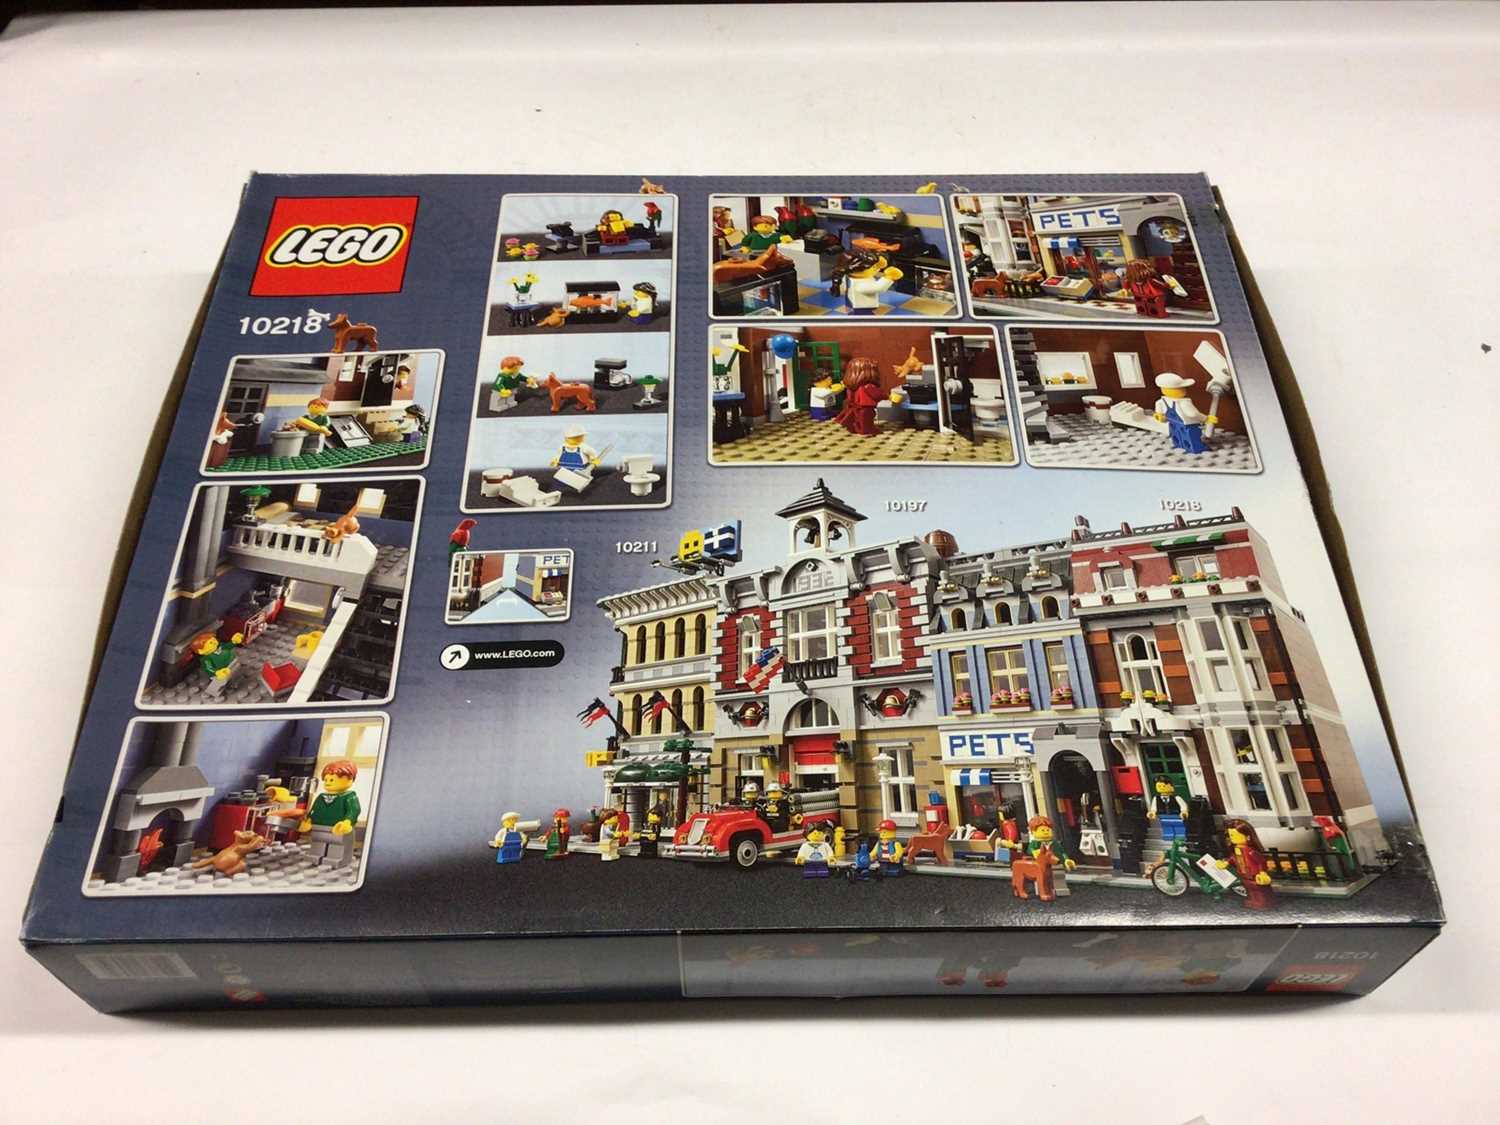 Lego Buildings 10214 Tower Bridge, 10218 Pet Shop, with instructions, Boxed - Image 4 of 4